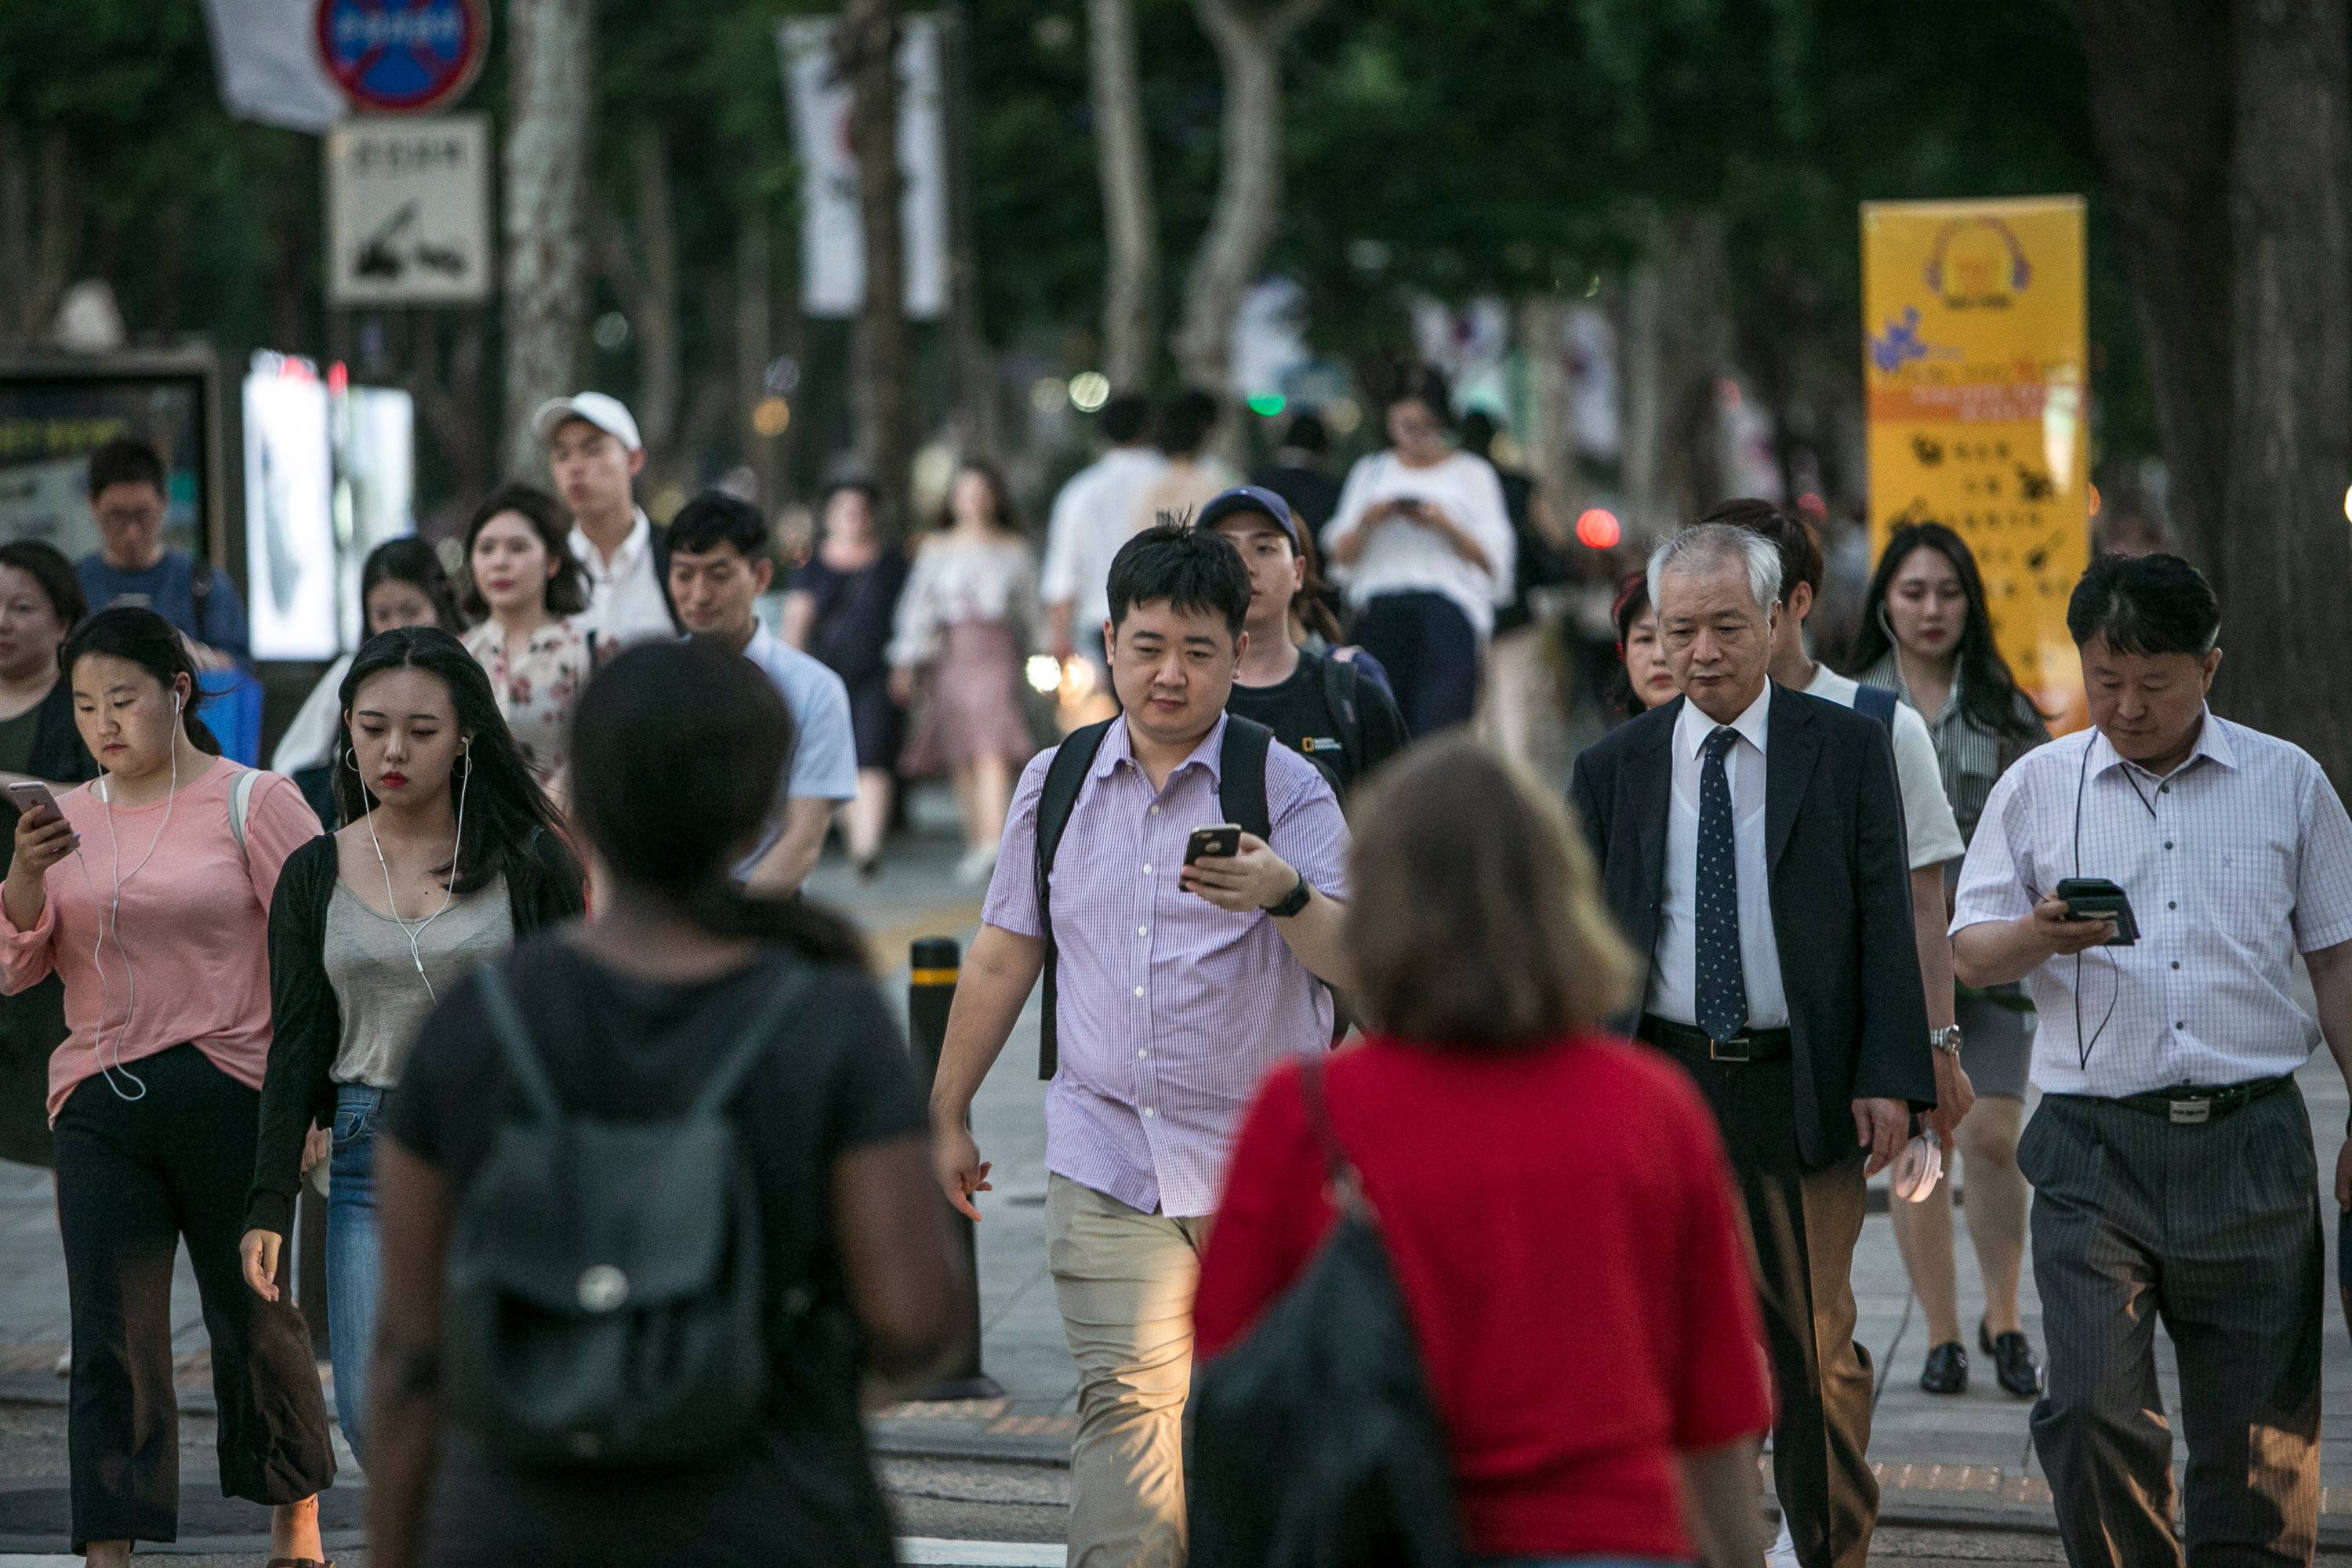 Commuters walk in a business district in Seoul. South Korea has three ways of calculating age, often adding a year or two to the international standard. The incoming president wants to change that.  | JEAN CHUNG/THE NEW YORK TIMES